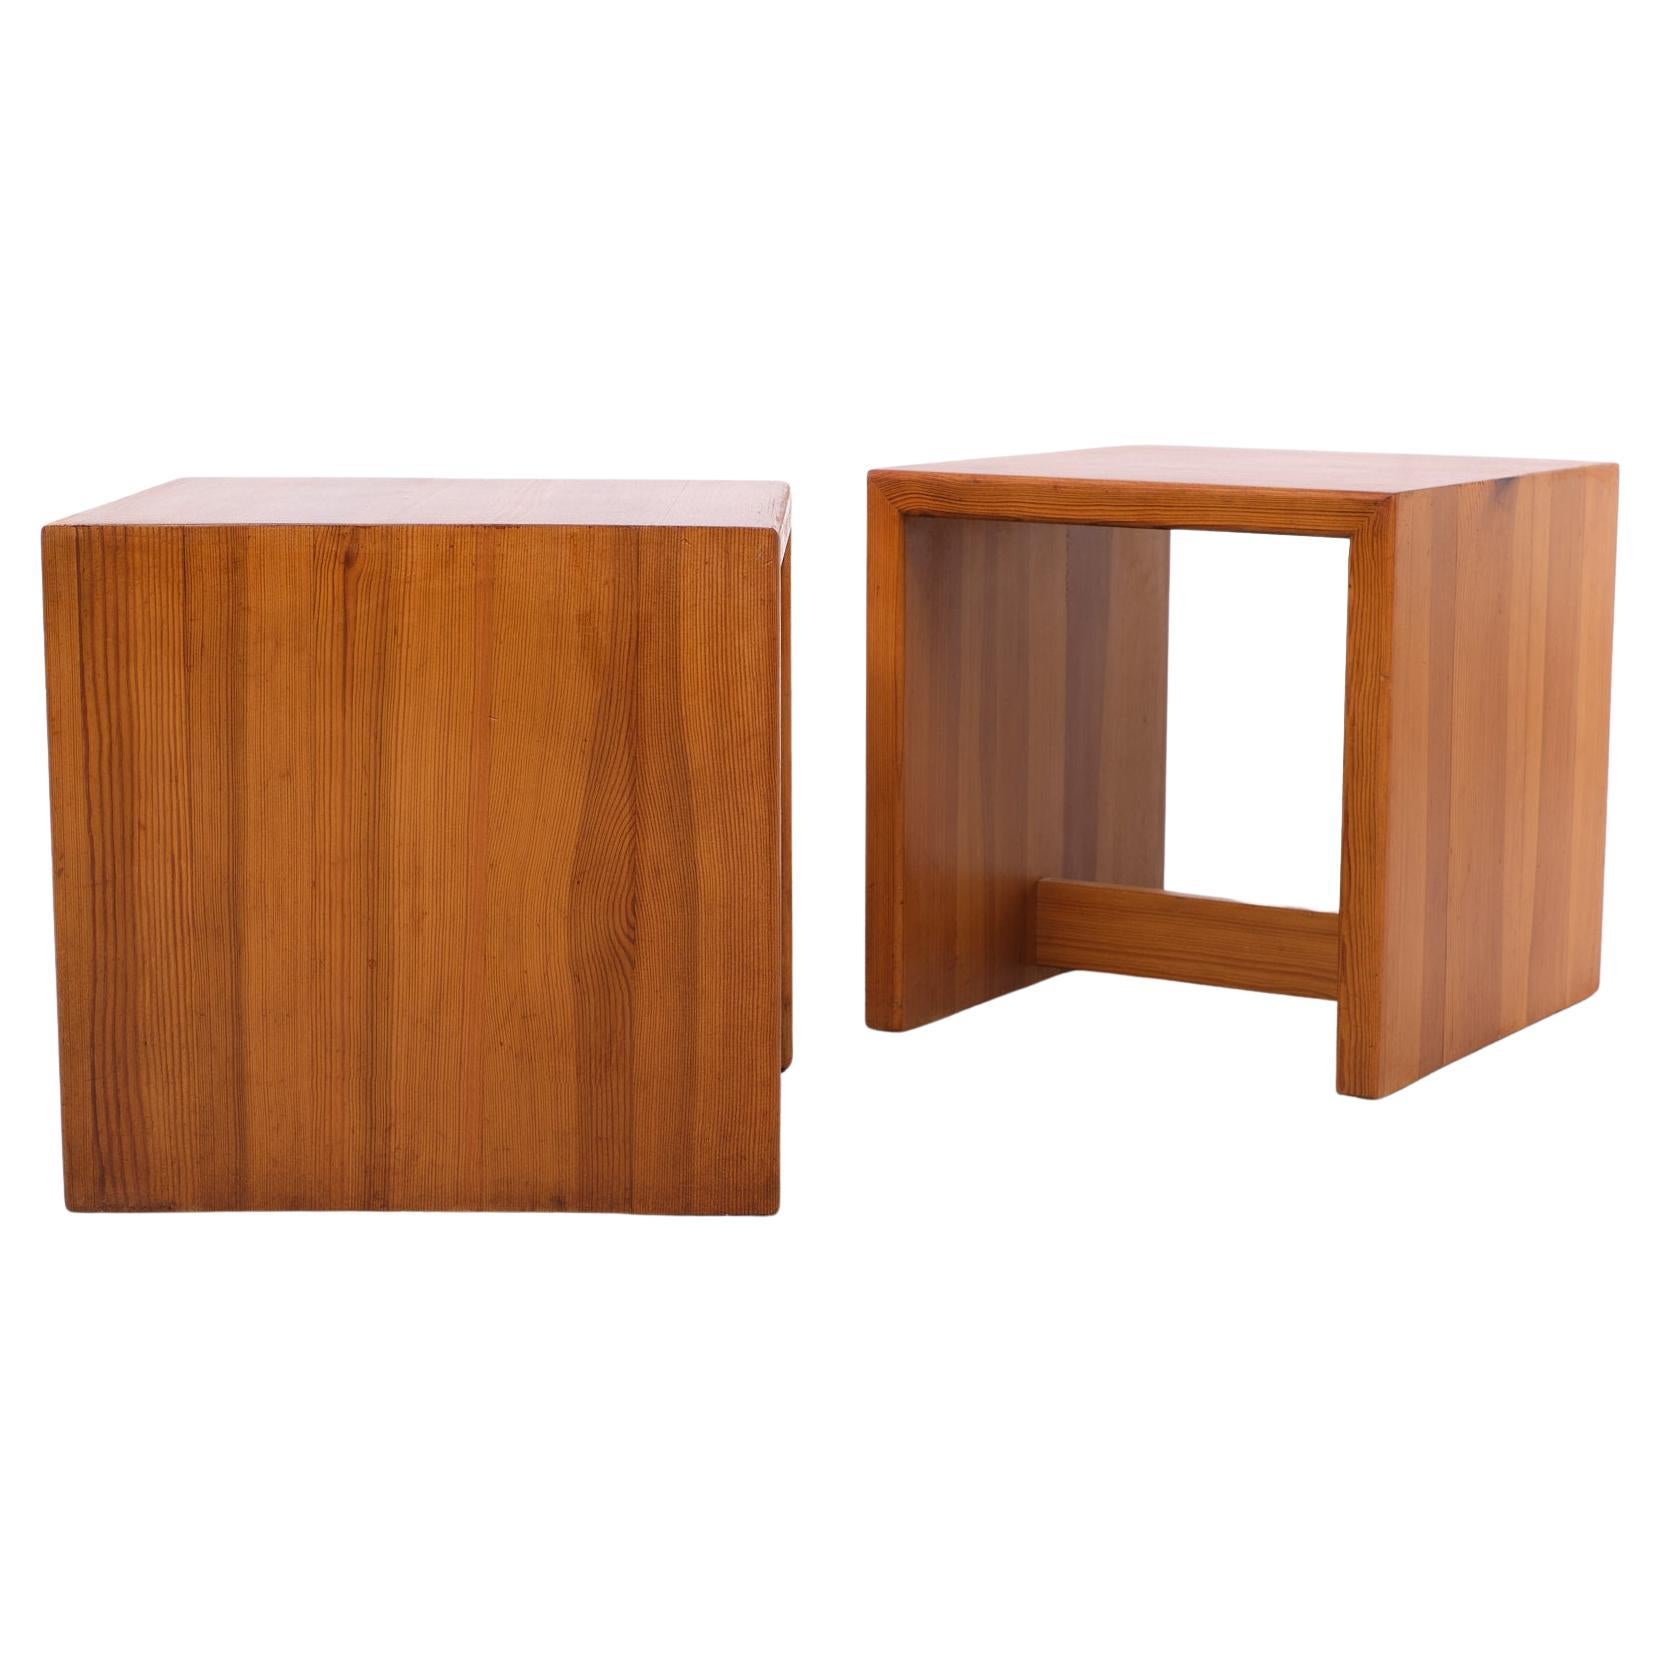 Very nice set of identical side tables or Nightstands. Executed in 
solid Pine. Charlotte Perriand in style. 1960s Nice warm color.